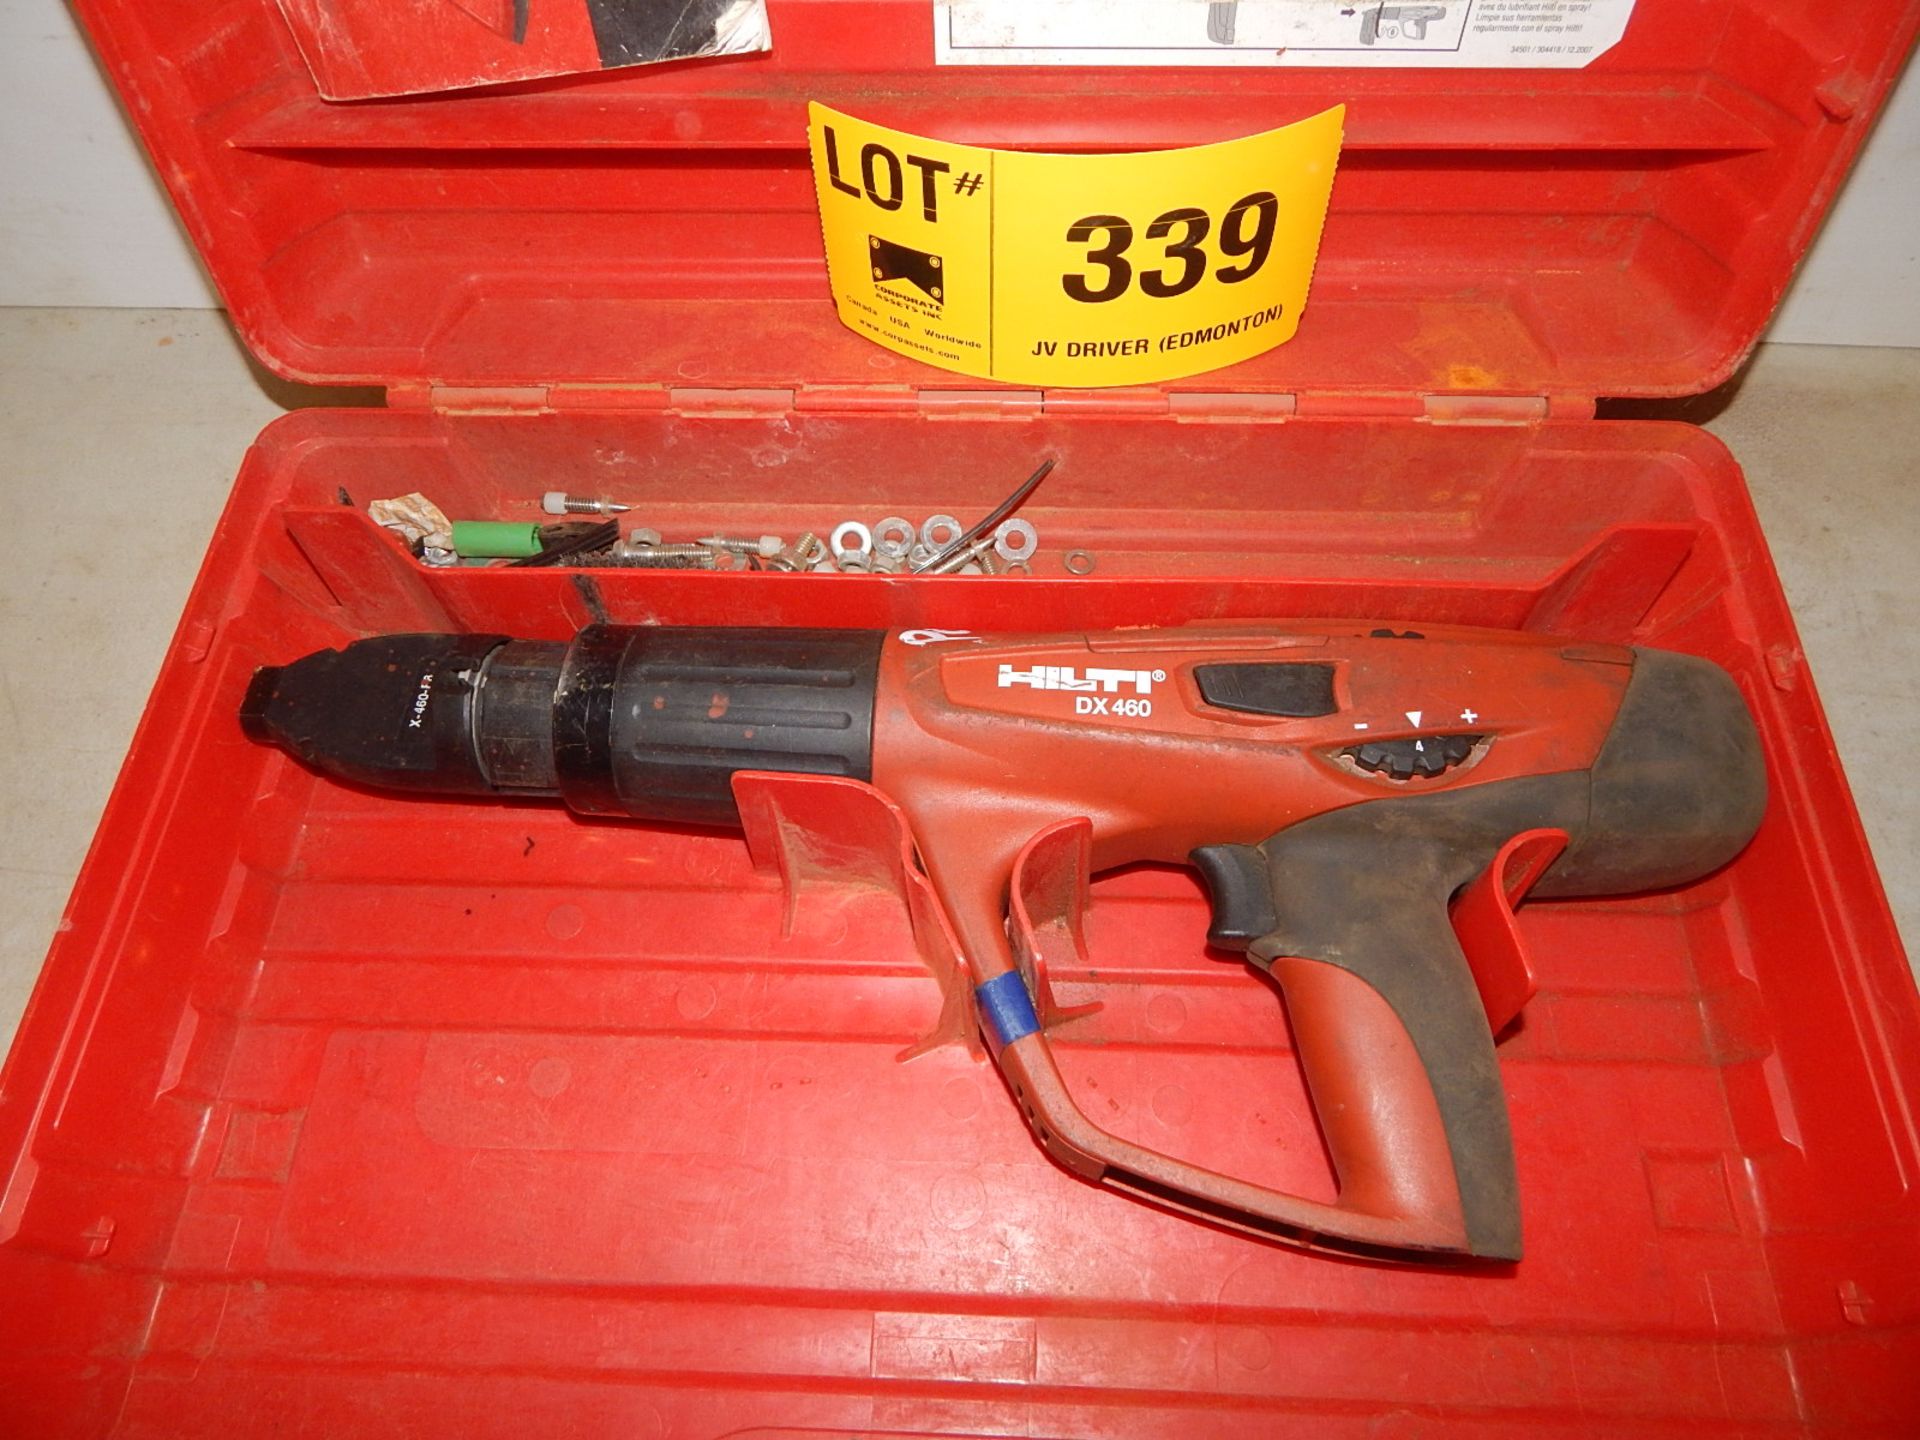 HILTI DX 460-F8 POWDER-ACTUATED FASTENING TOOL, S/N: N/A